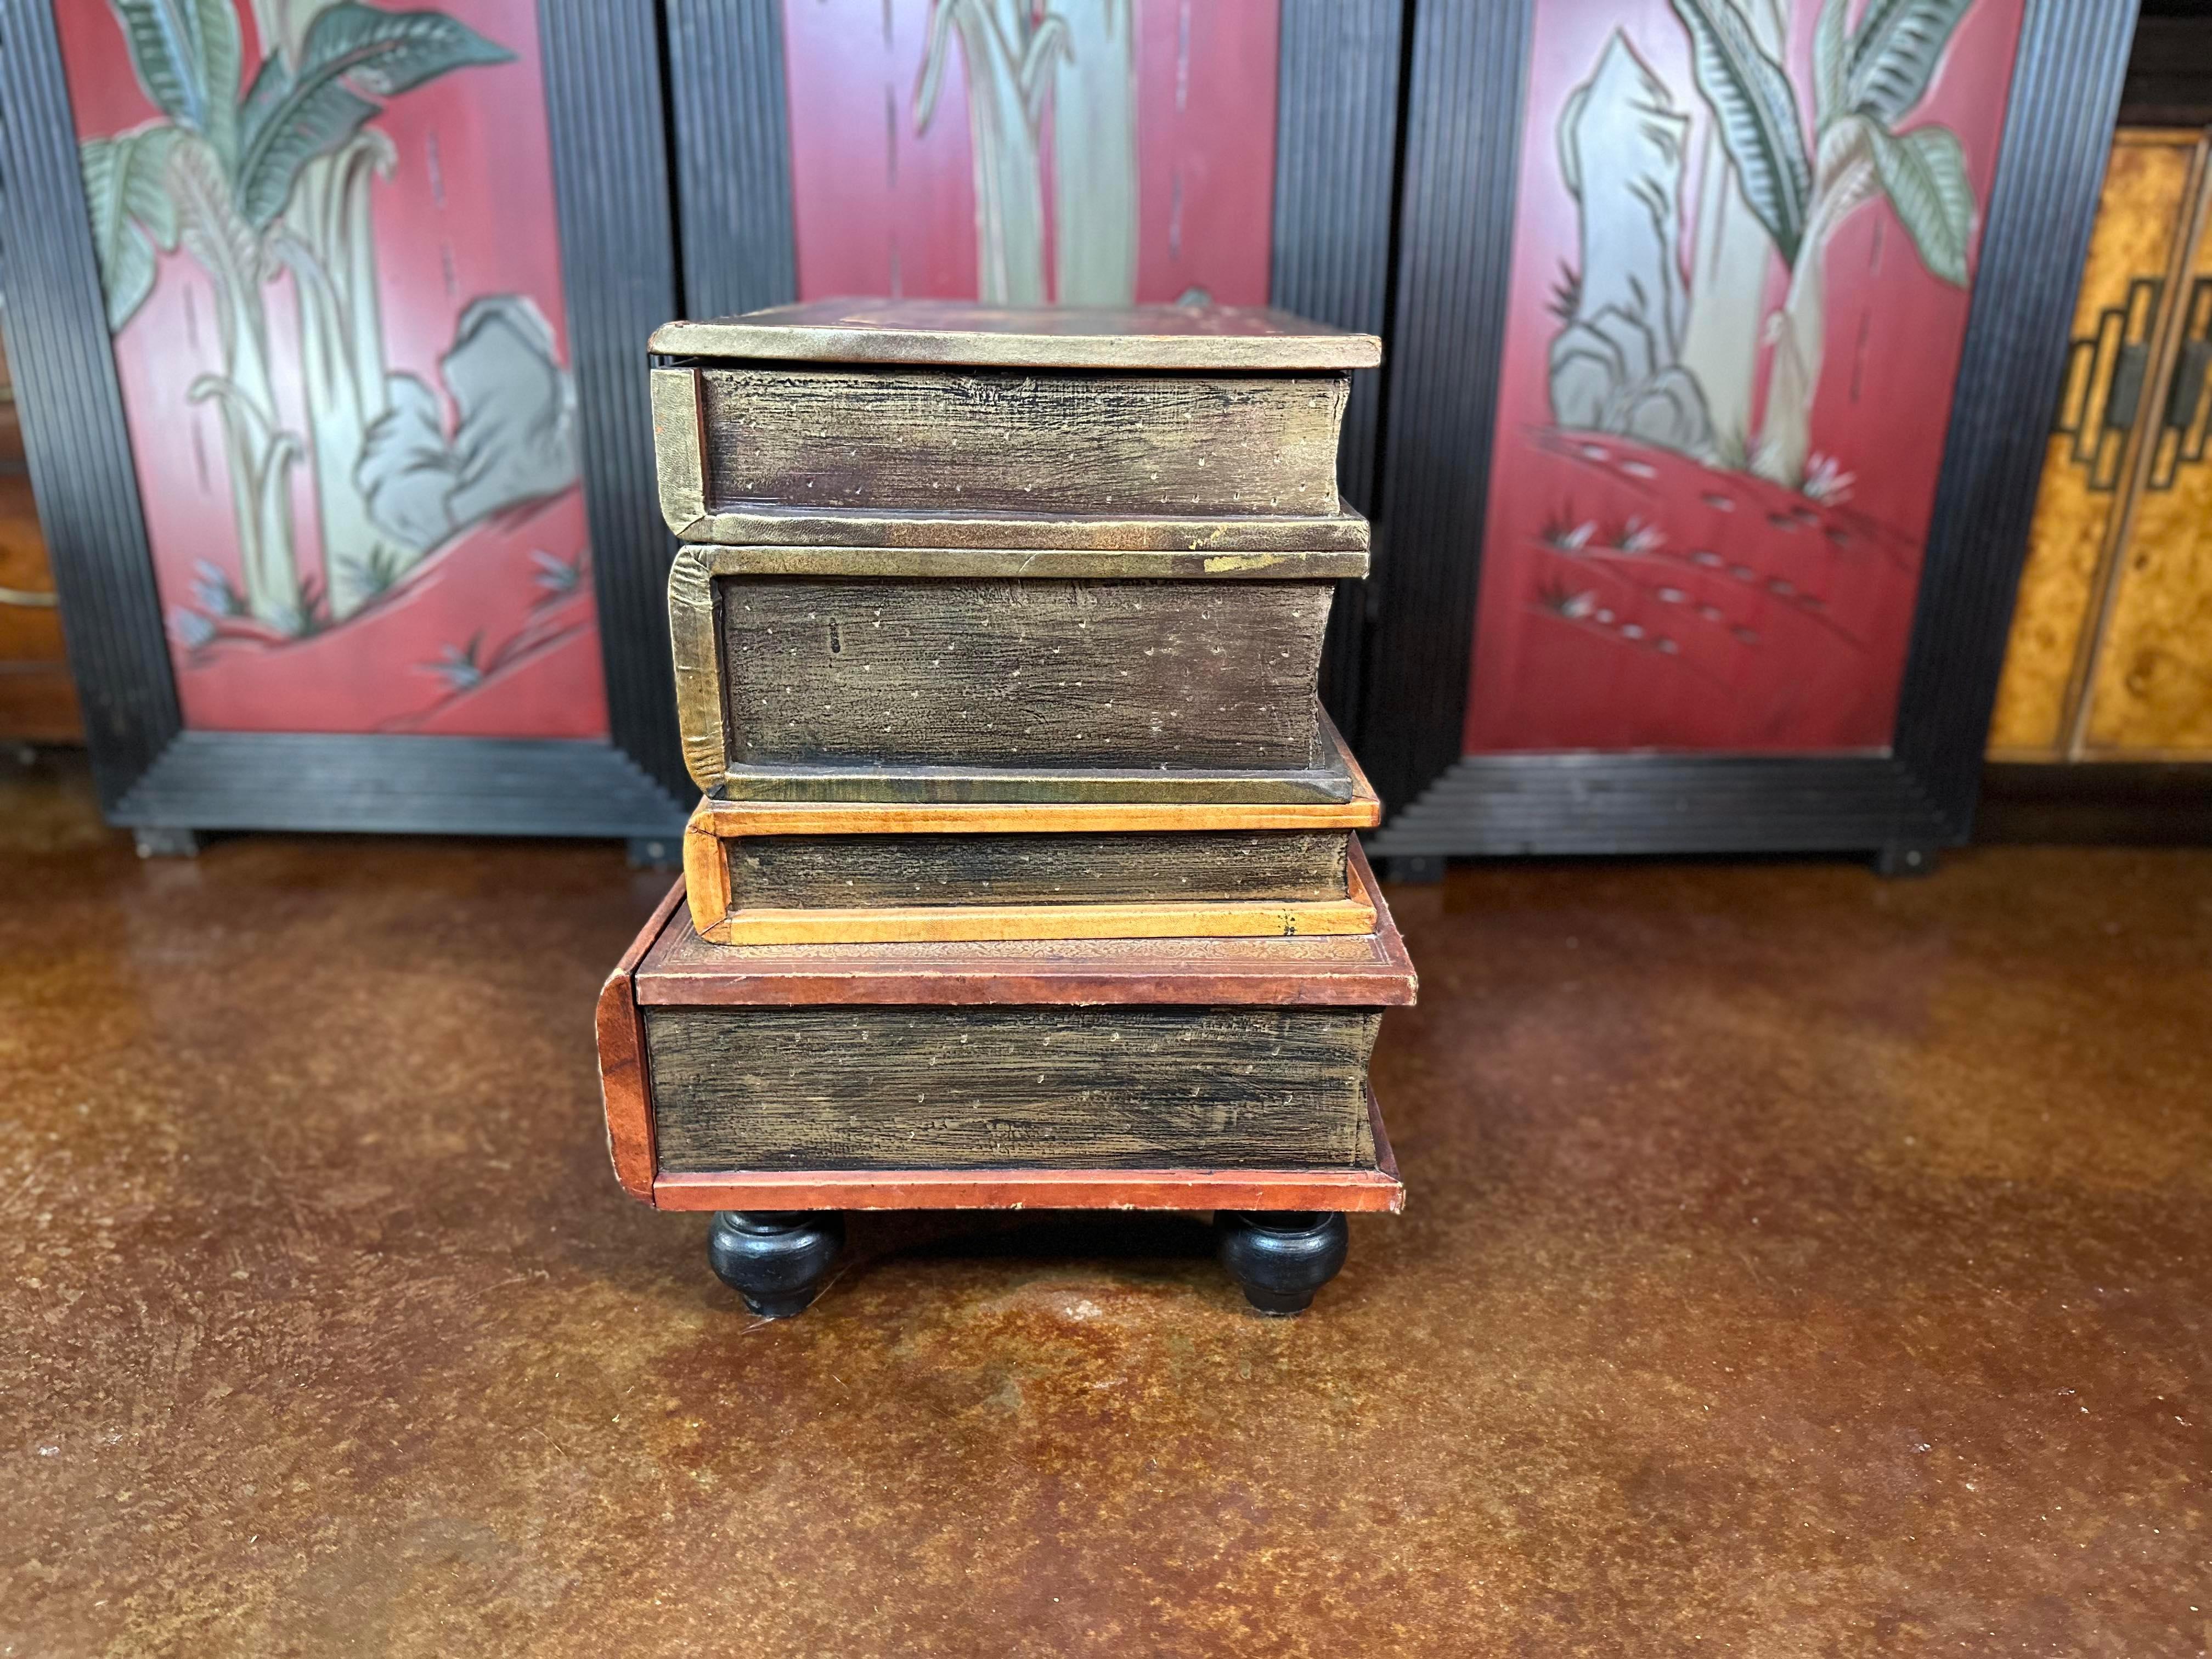 Vintage Figurative Italian Leather Stacked Books Storage Table  In Fair Condition For Sale In Waxahachie, TX